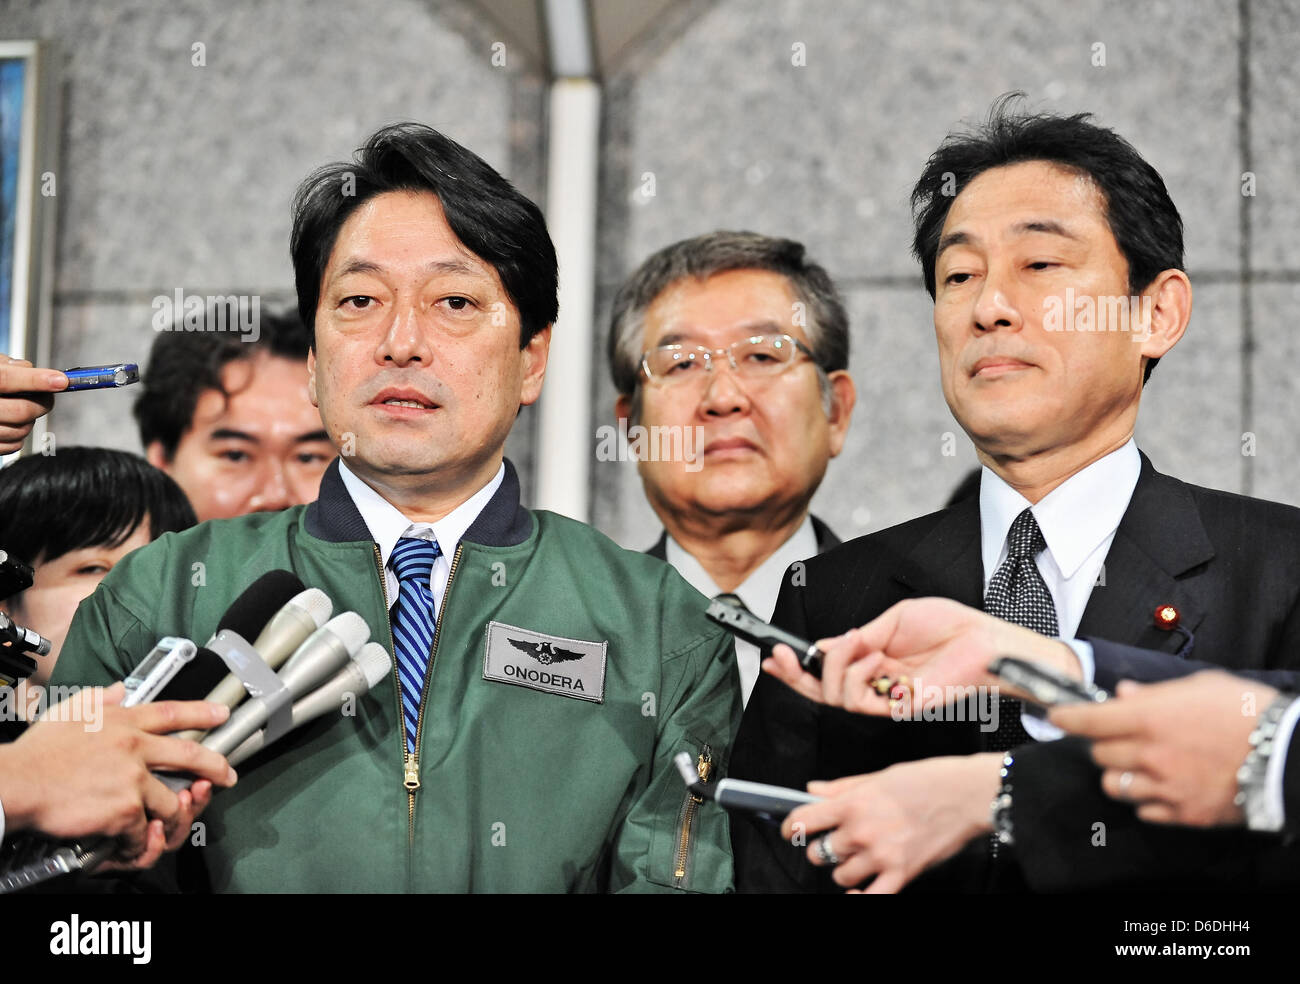 Fumio Kishida, Itsunori Onodera, PAC3, April 13, 2013, Tokyo, Japan : Japan's Foreign Minister Fumio Kishida(R) and Defense Minister Itsunori Onodera(C) speak to reporters after their inspect units of Patriot Advanced Capability-3 (PAC-3) missiles at the Defense Ministry in Tokyo April 13, 2013. (Photo by AFLO) Stock Photo